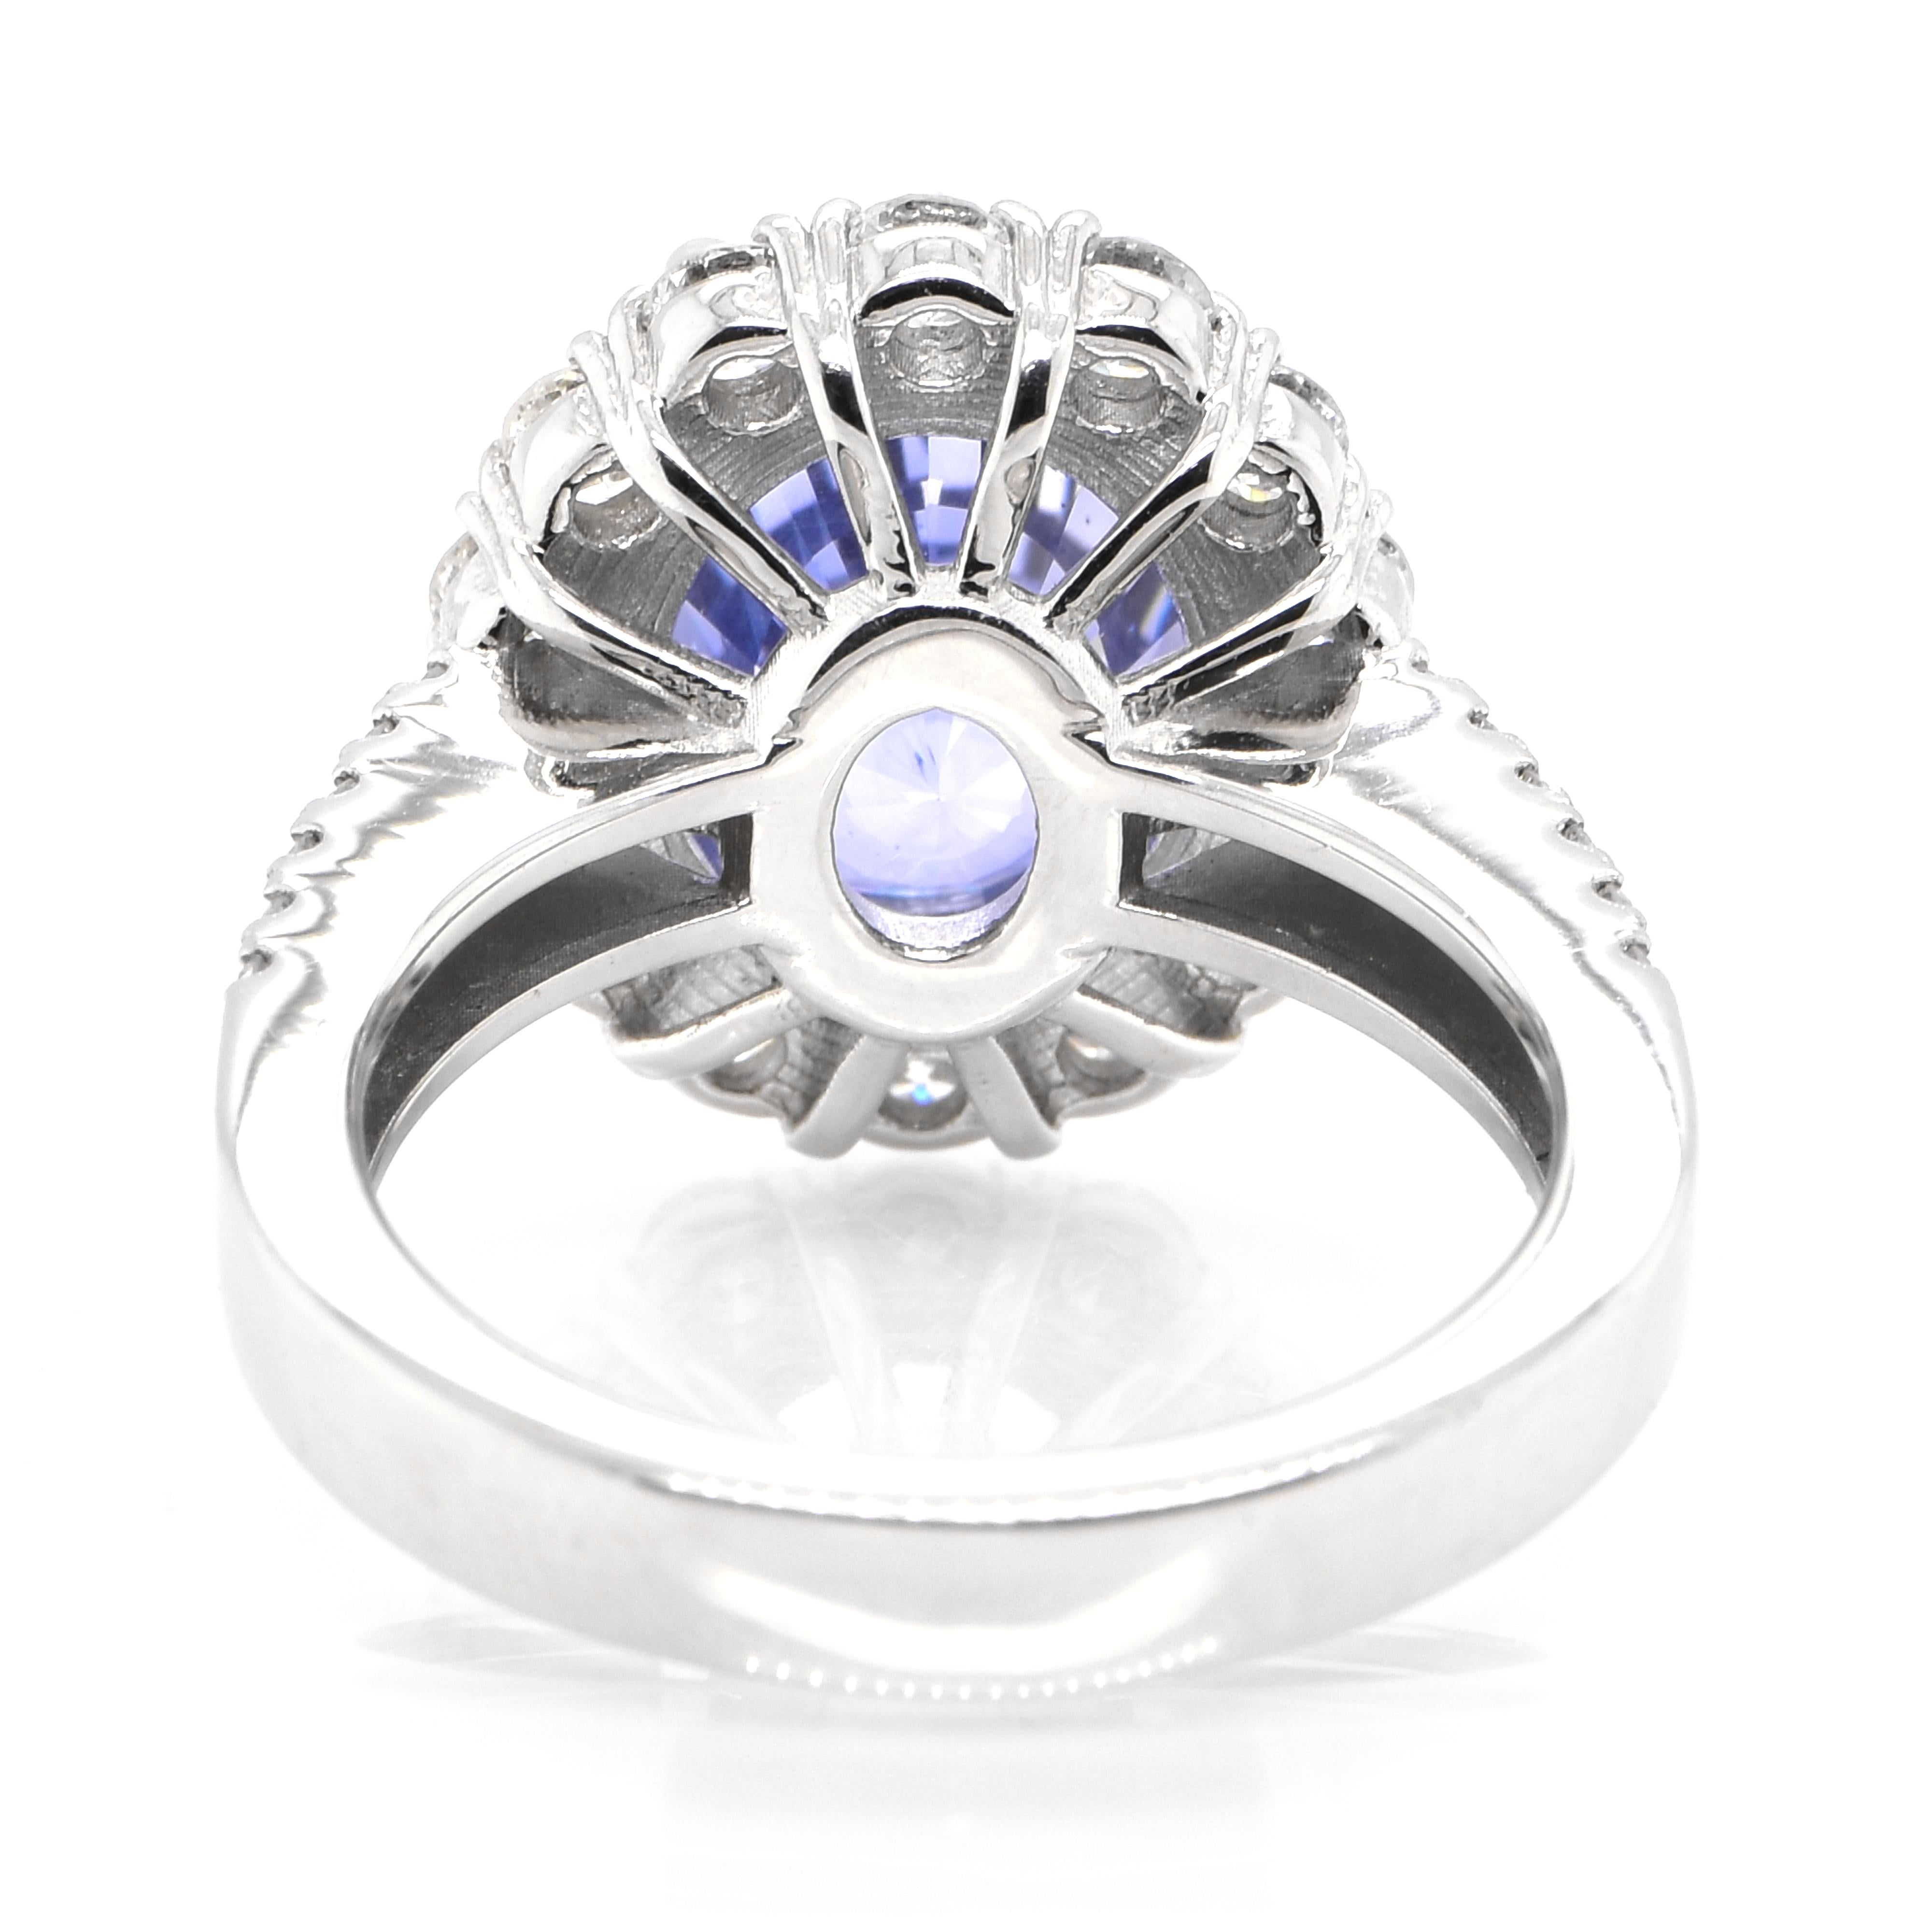 Women's 6.00 Carat Natural Unheated Sapphire and Diamond Cocktail Ring Made in Platinum For Sale